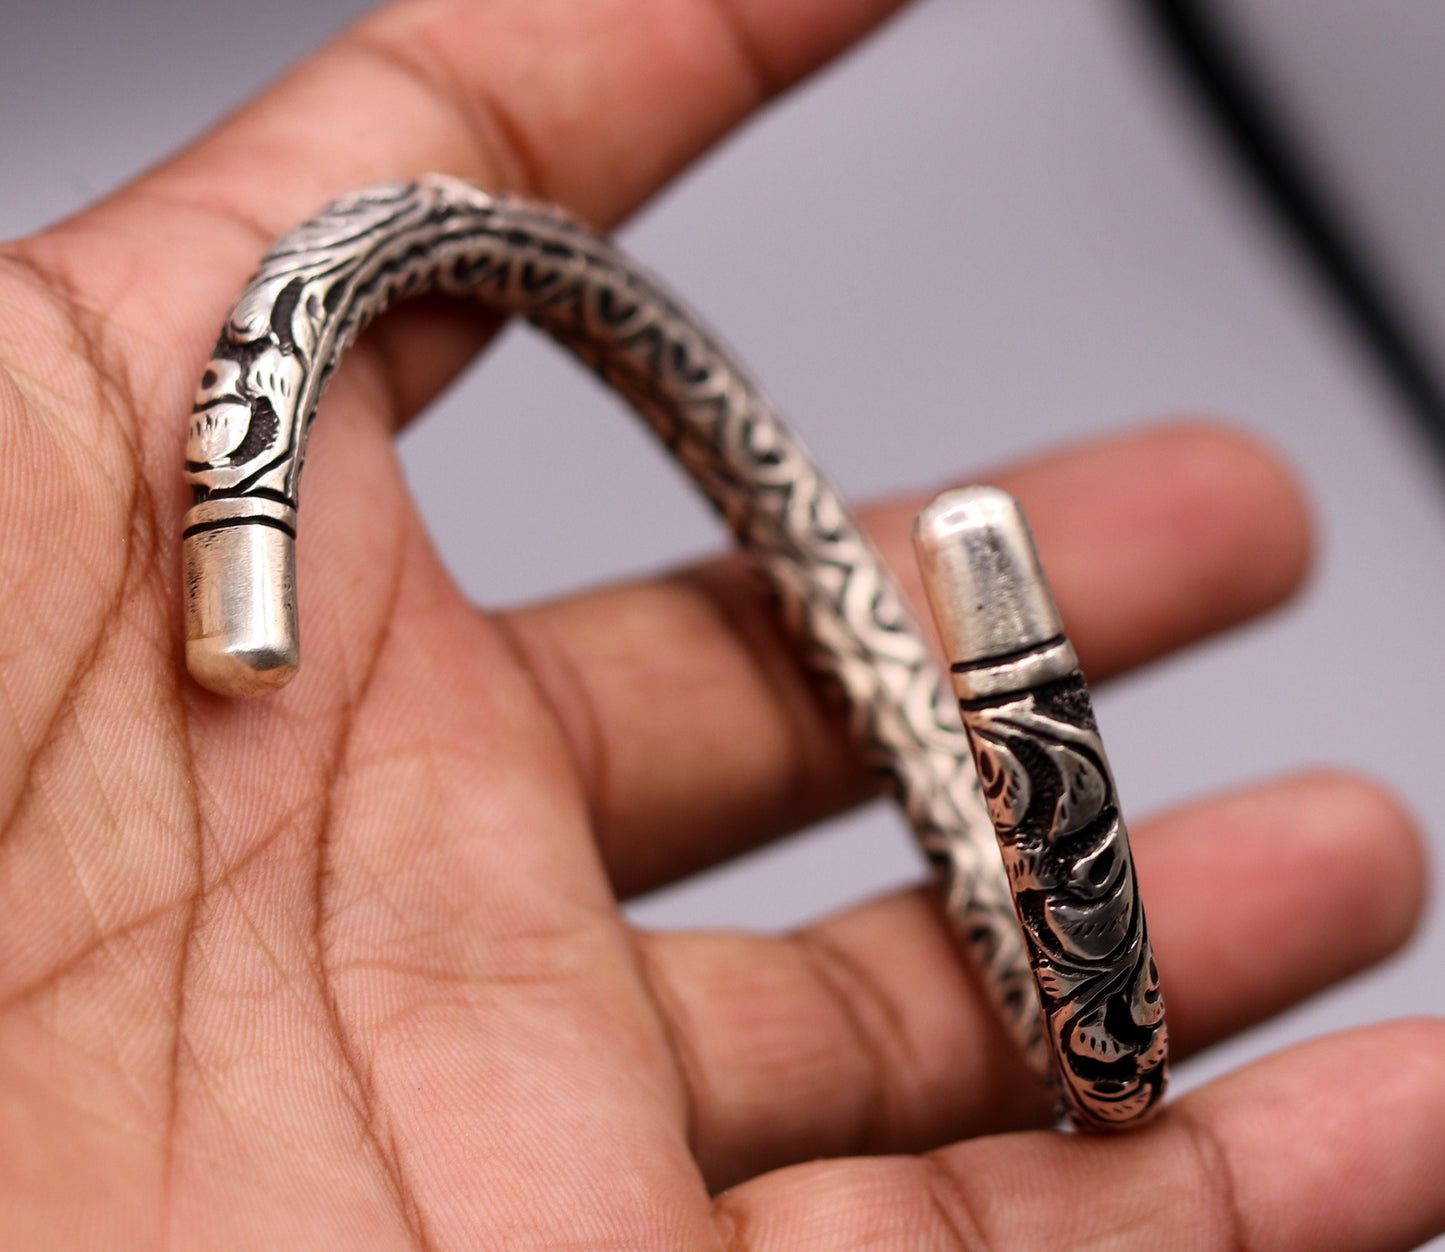 Fabulous 925 sterling silver handmade amazing engraving design wrist bangle bracelet kada, top class jewelry from Rajasthan India nsk63 - TRIBAL ORNAMENTS